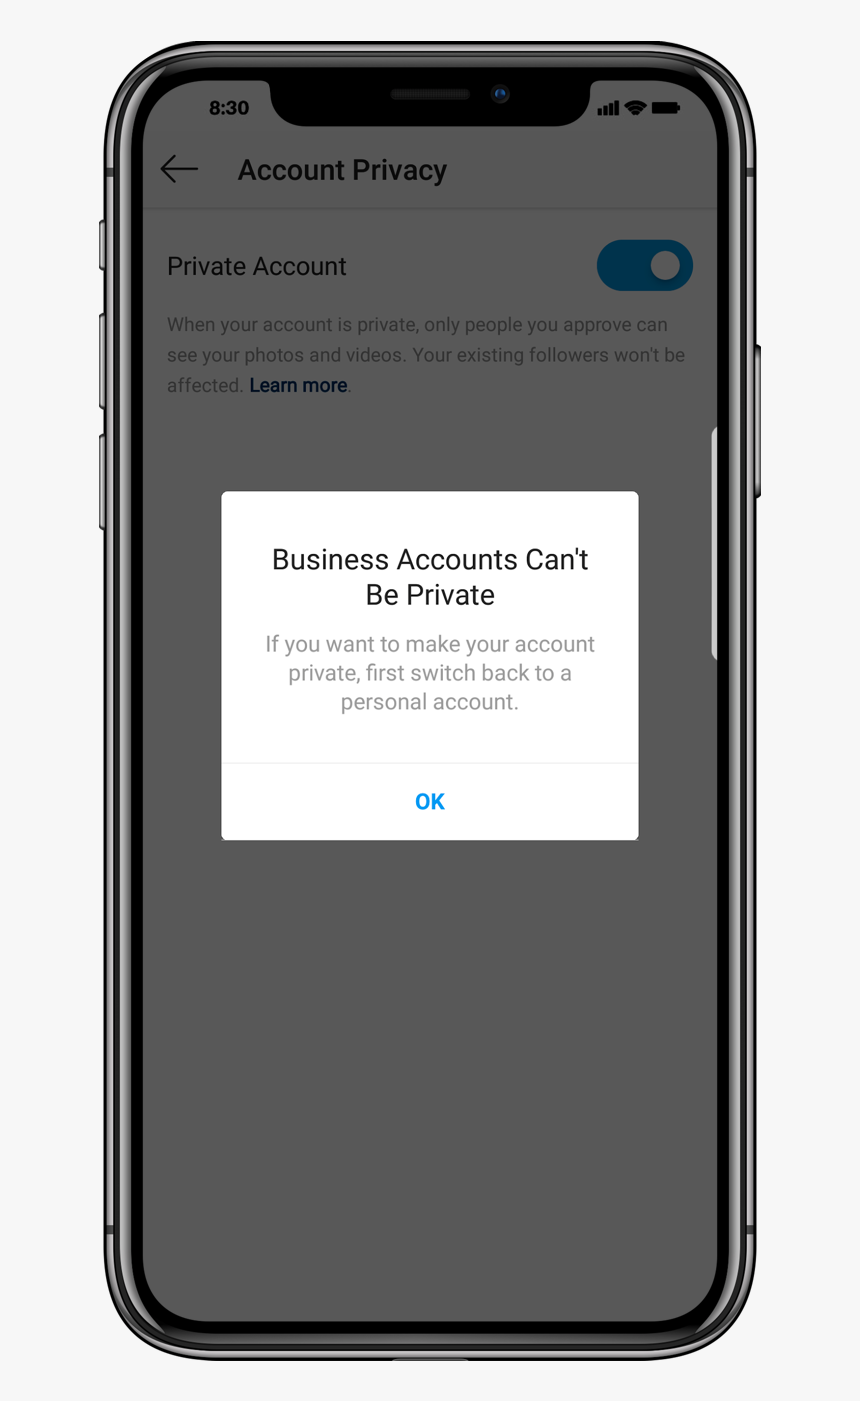 Change Account Privacy - Iphone, HD Png Download, Free Download